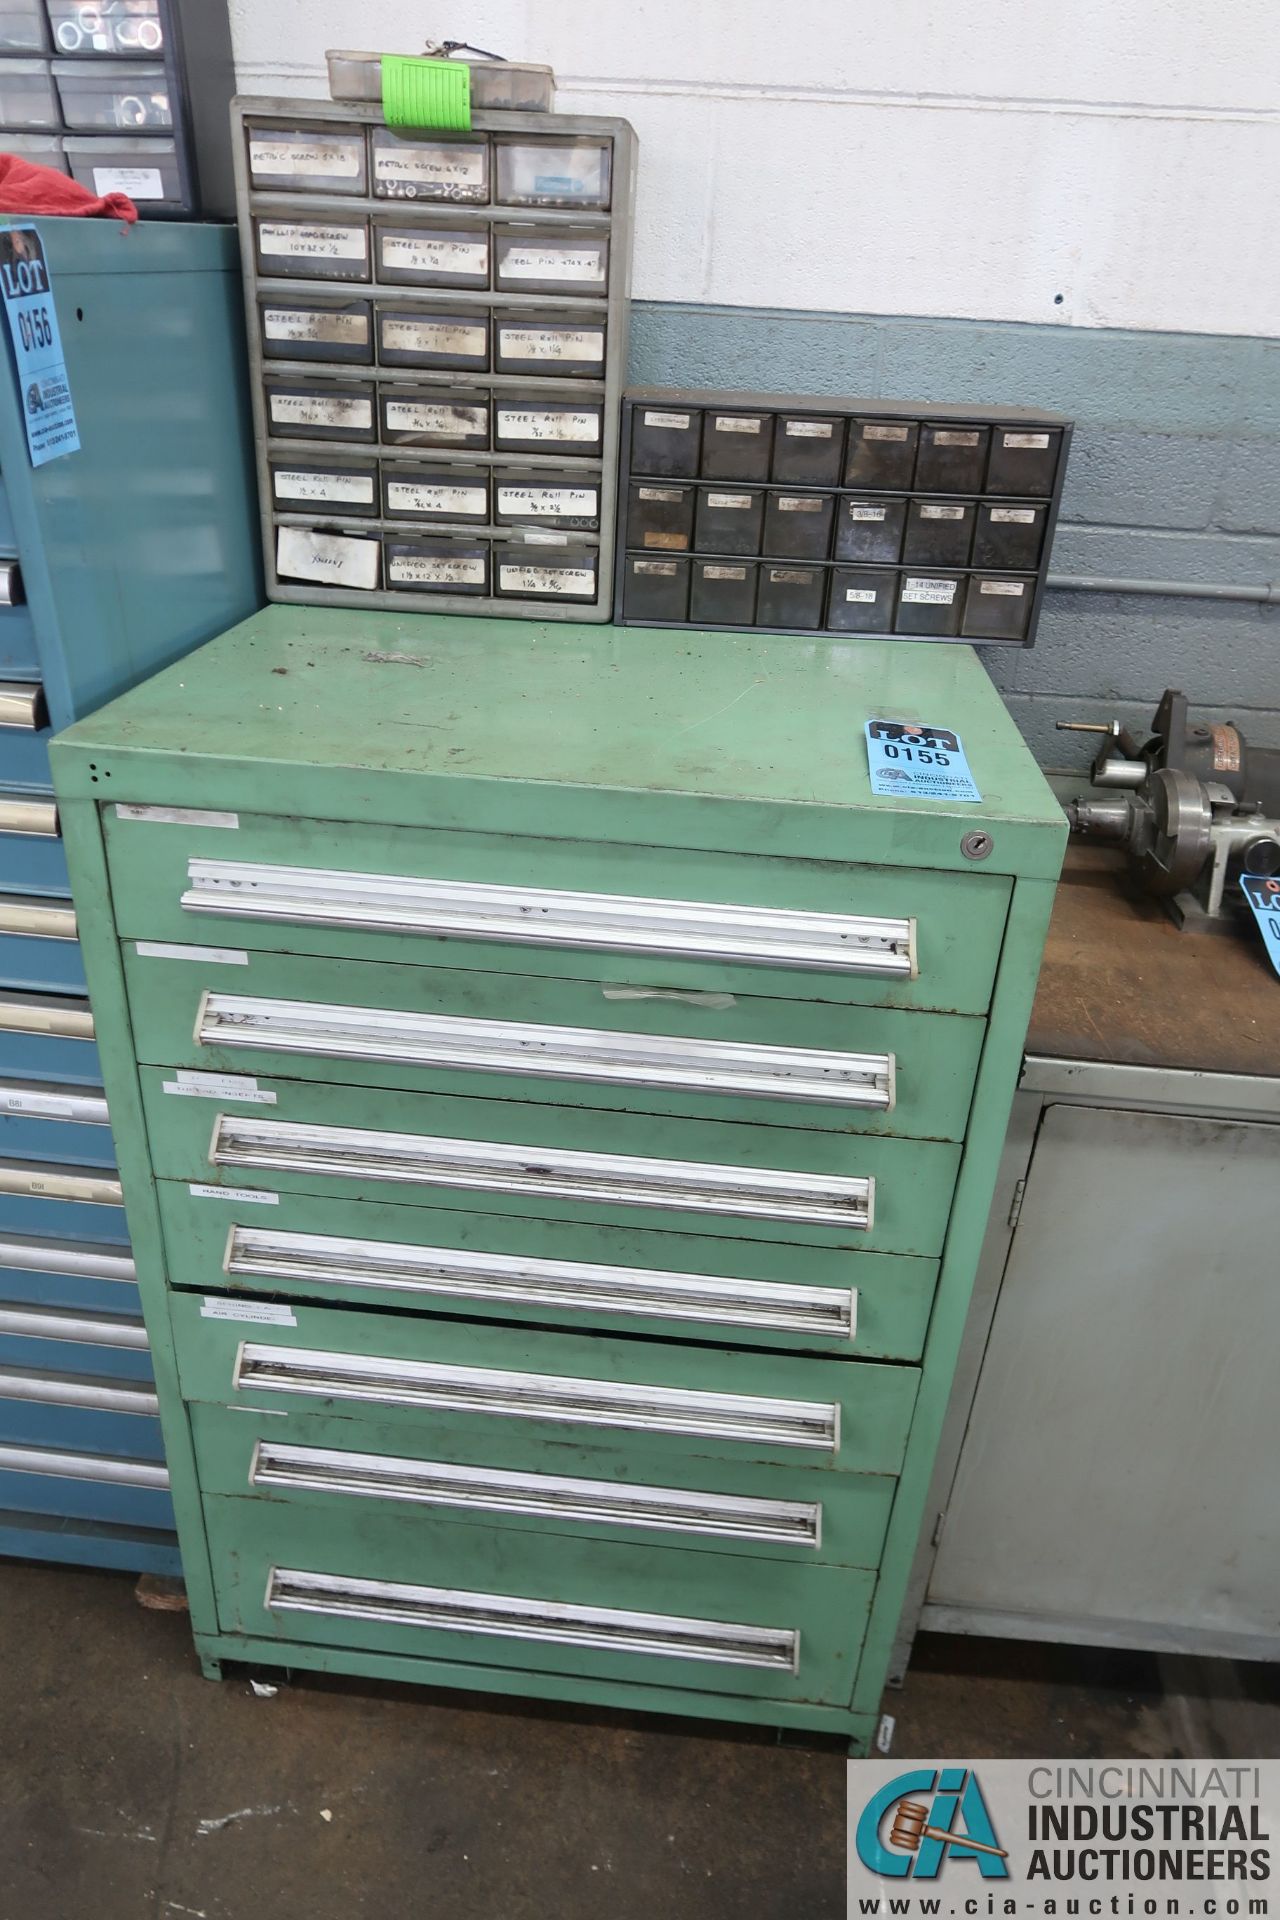 SEVEN-DRAWER TOOLING CABINET W/ CONTENTS (RIVETS, HARDWARE, PINS, TOOLS, DIE, SPRINGS, & OTHER